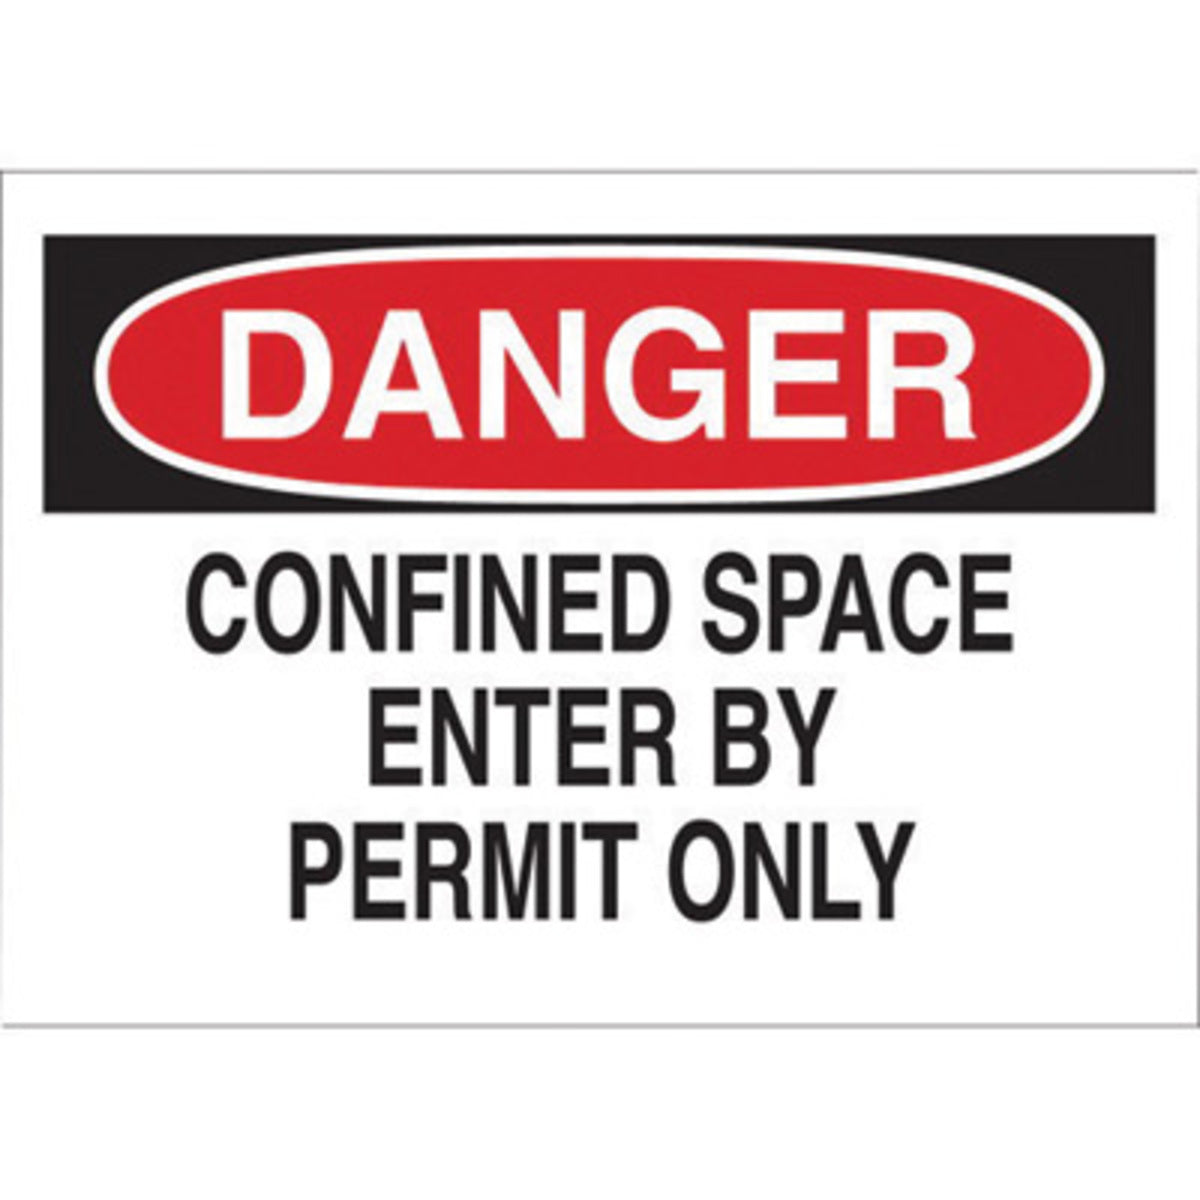 Brady® 10" X 14" X .06" Black/Red On White .0591" B-401 Polystyrene Admittance Sign "DANGER CONFINED SPACE ENTER BY PERMIT ONLY"